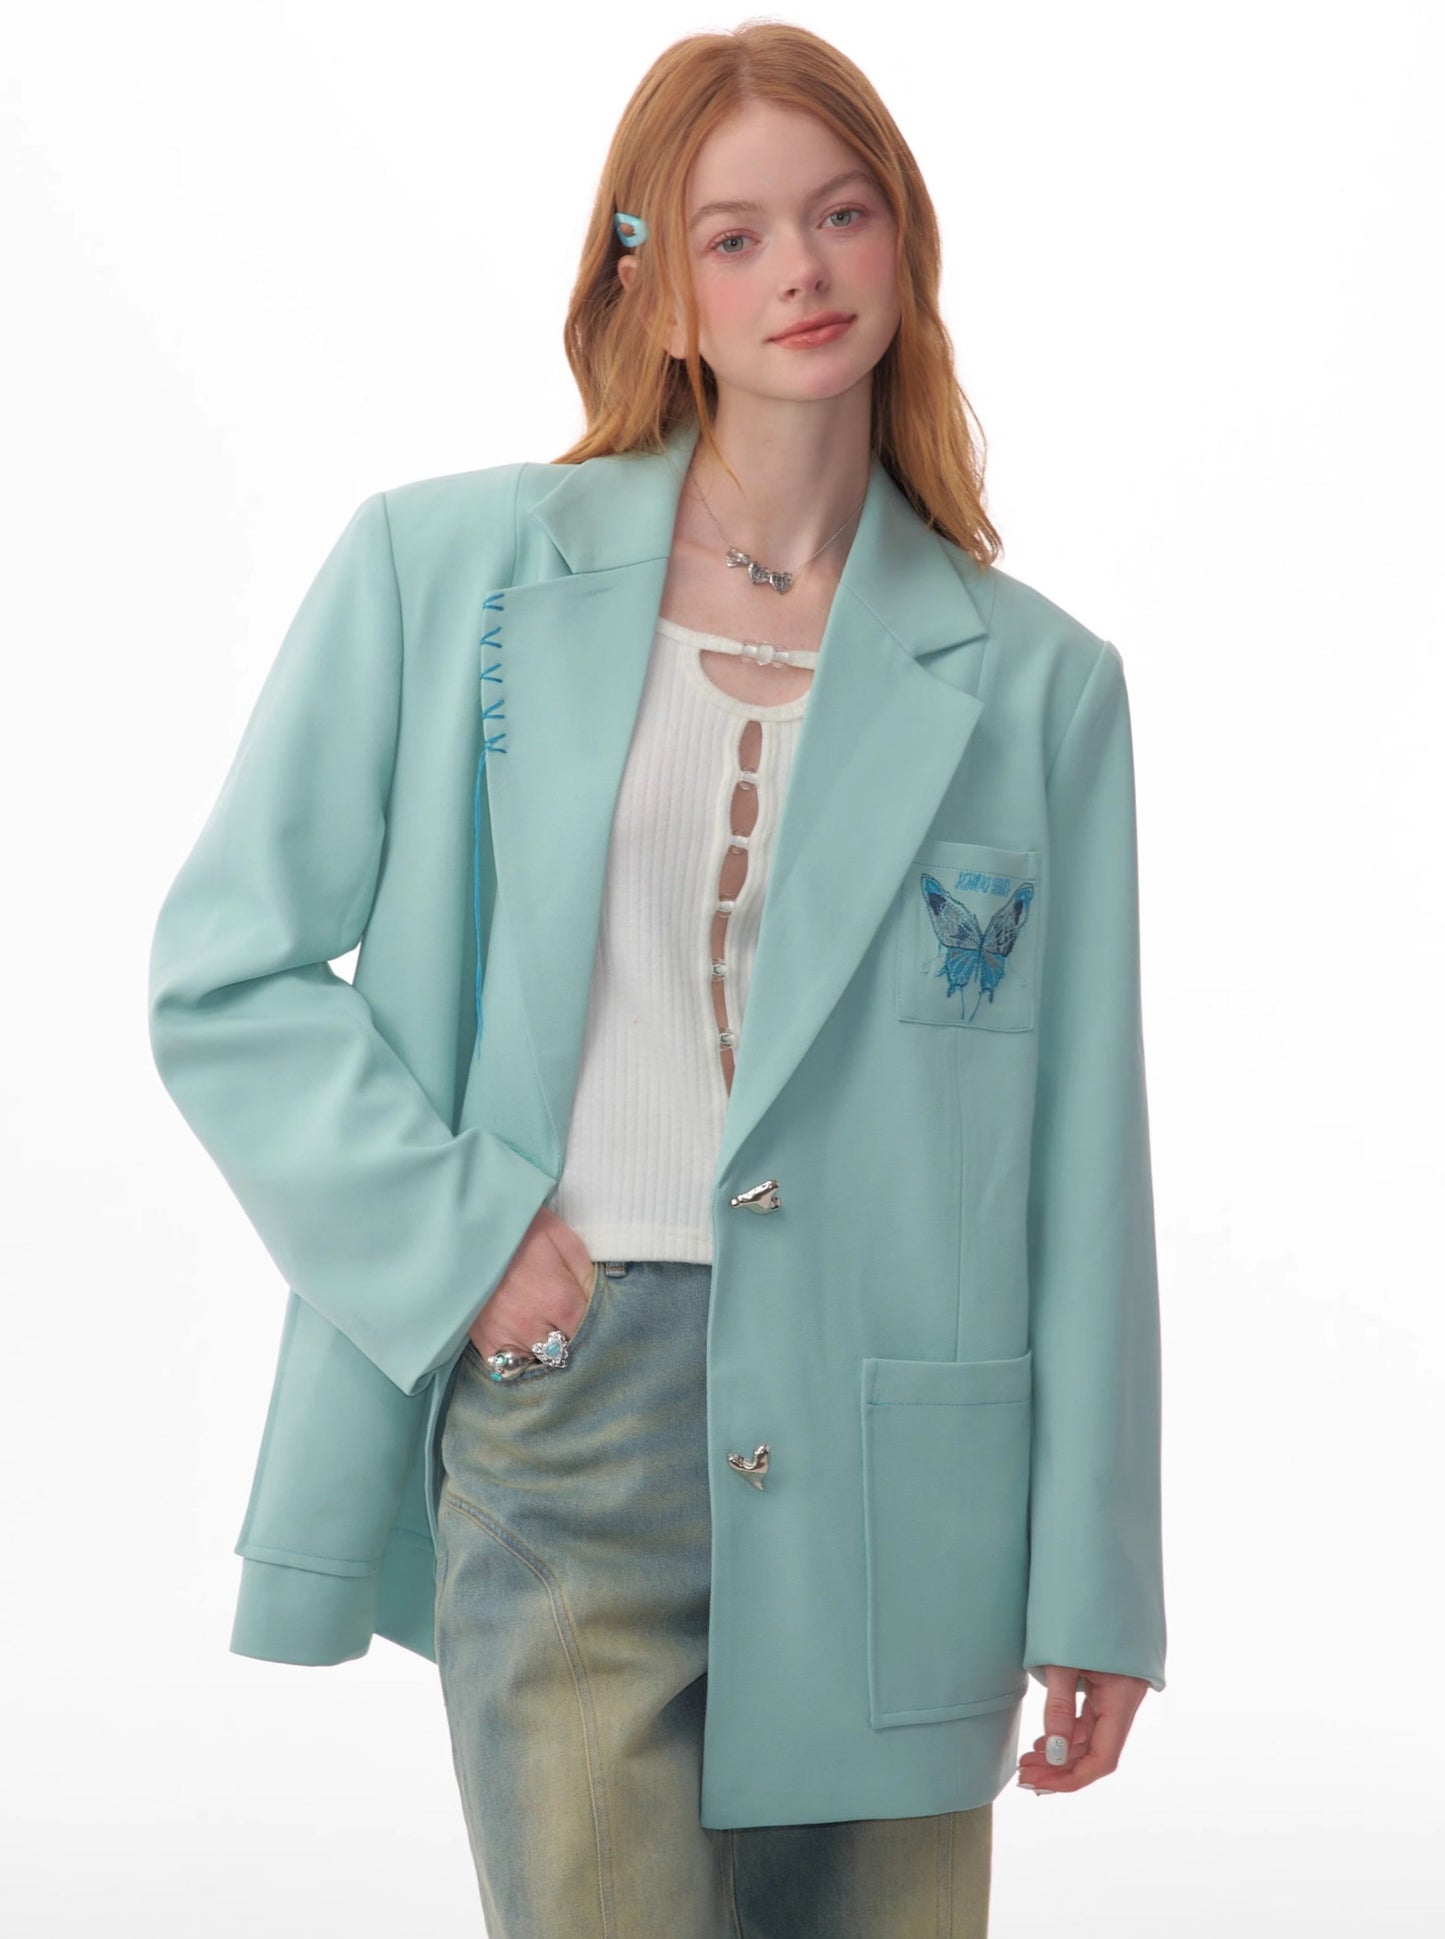 American butterfly embroidery casual blazer jacket